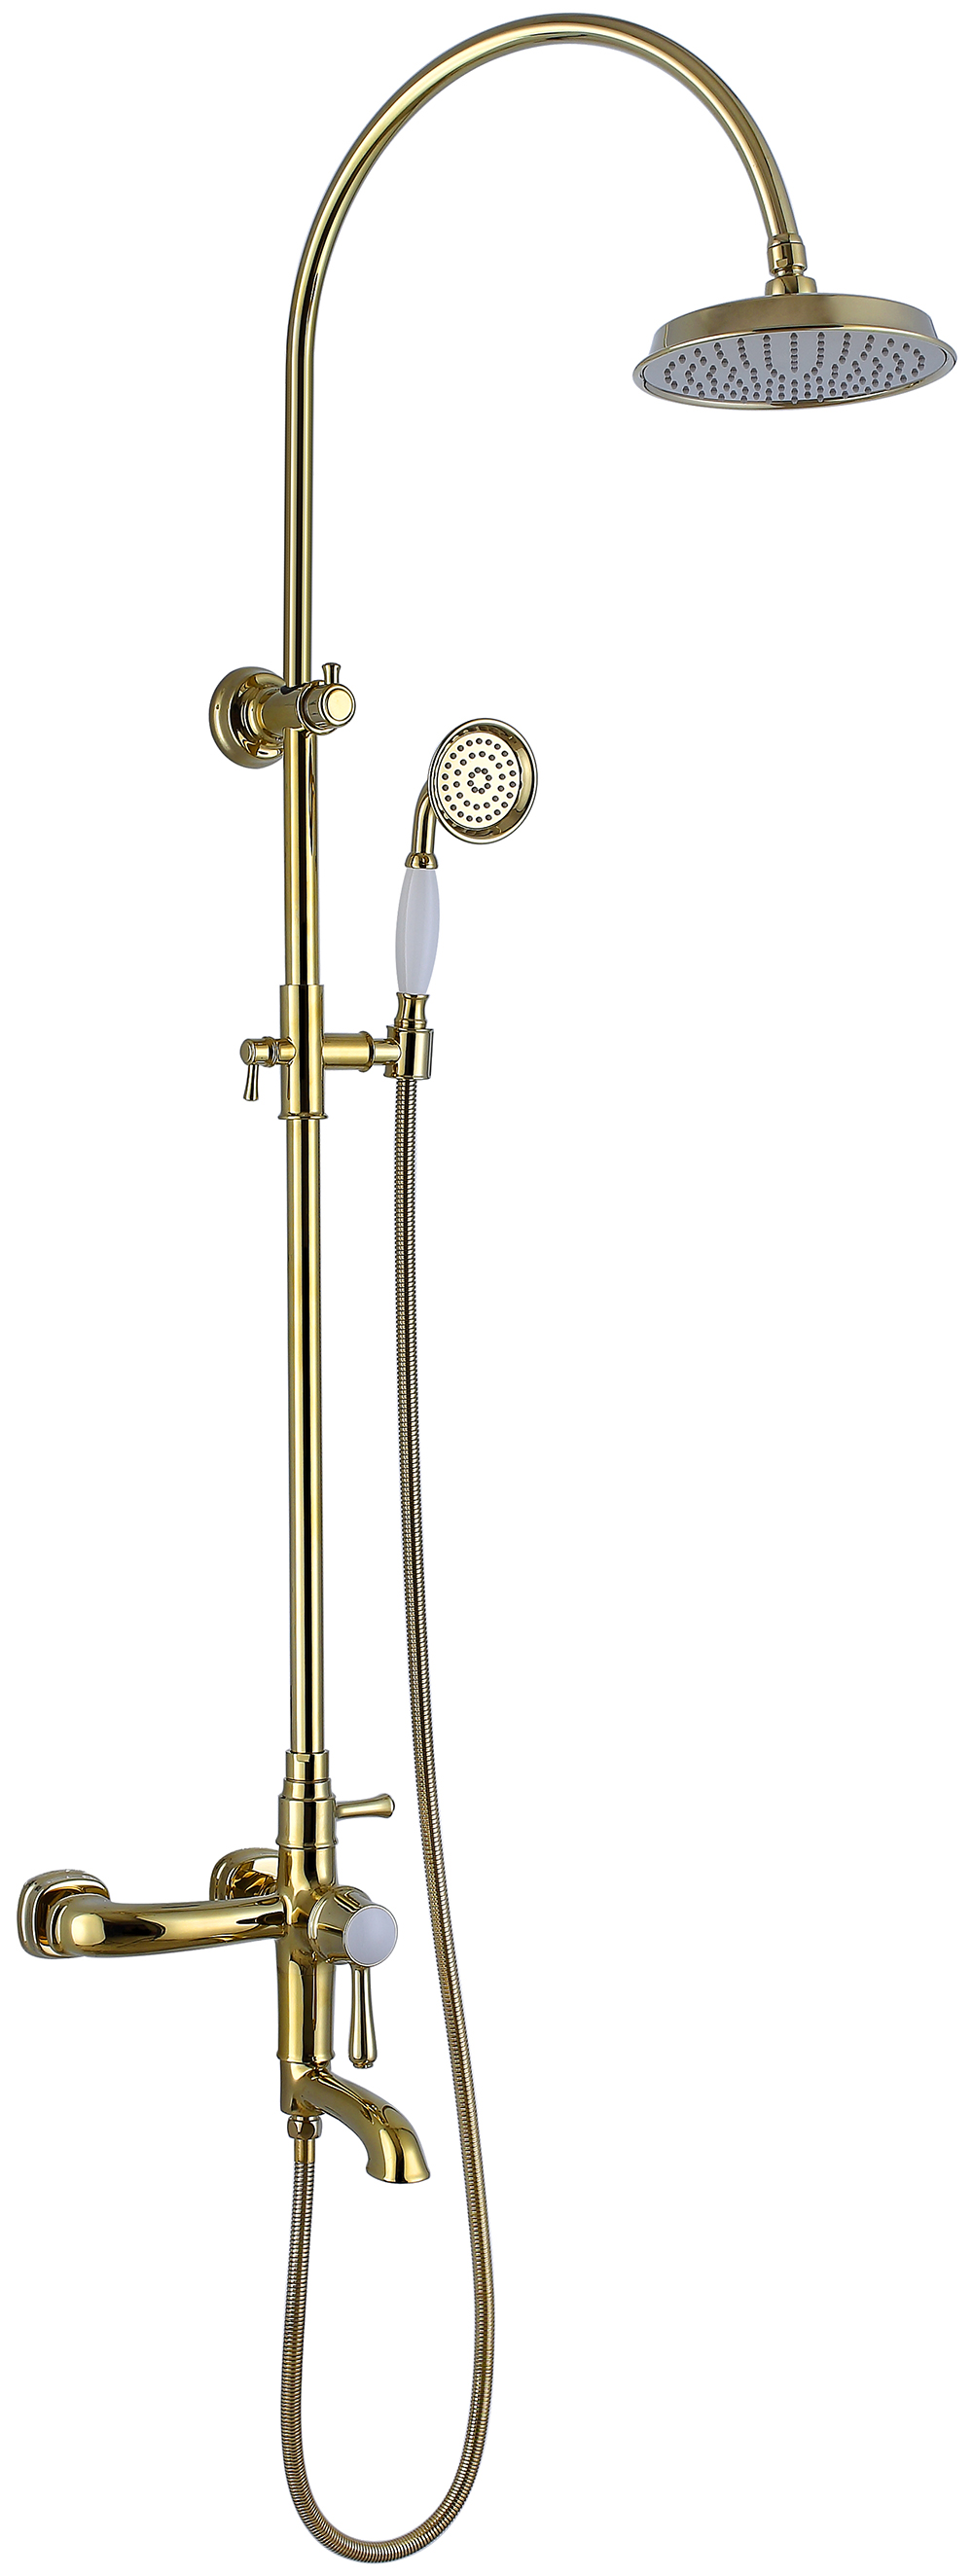 High Quality Rose Gold Thermostatic Exposed Shower Set With Handheld Shower For Bathroom